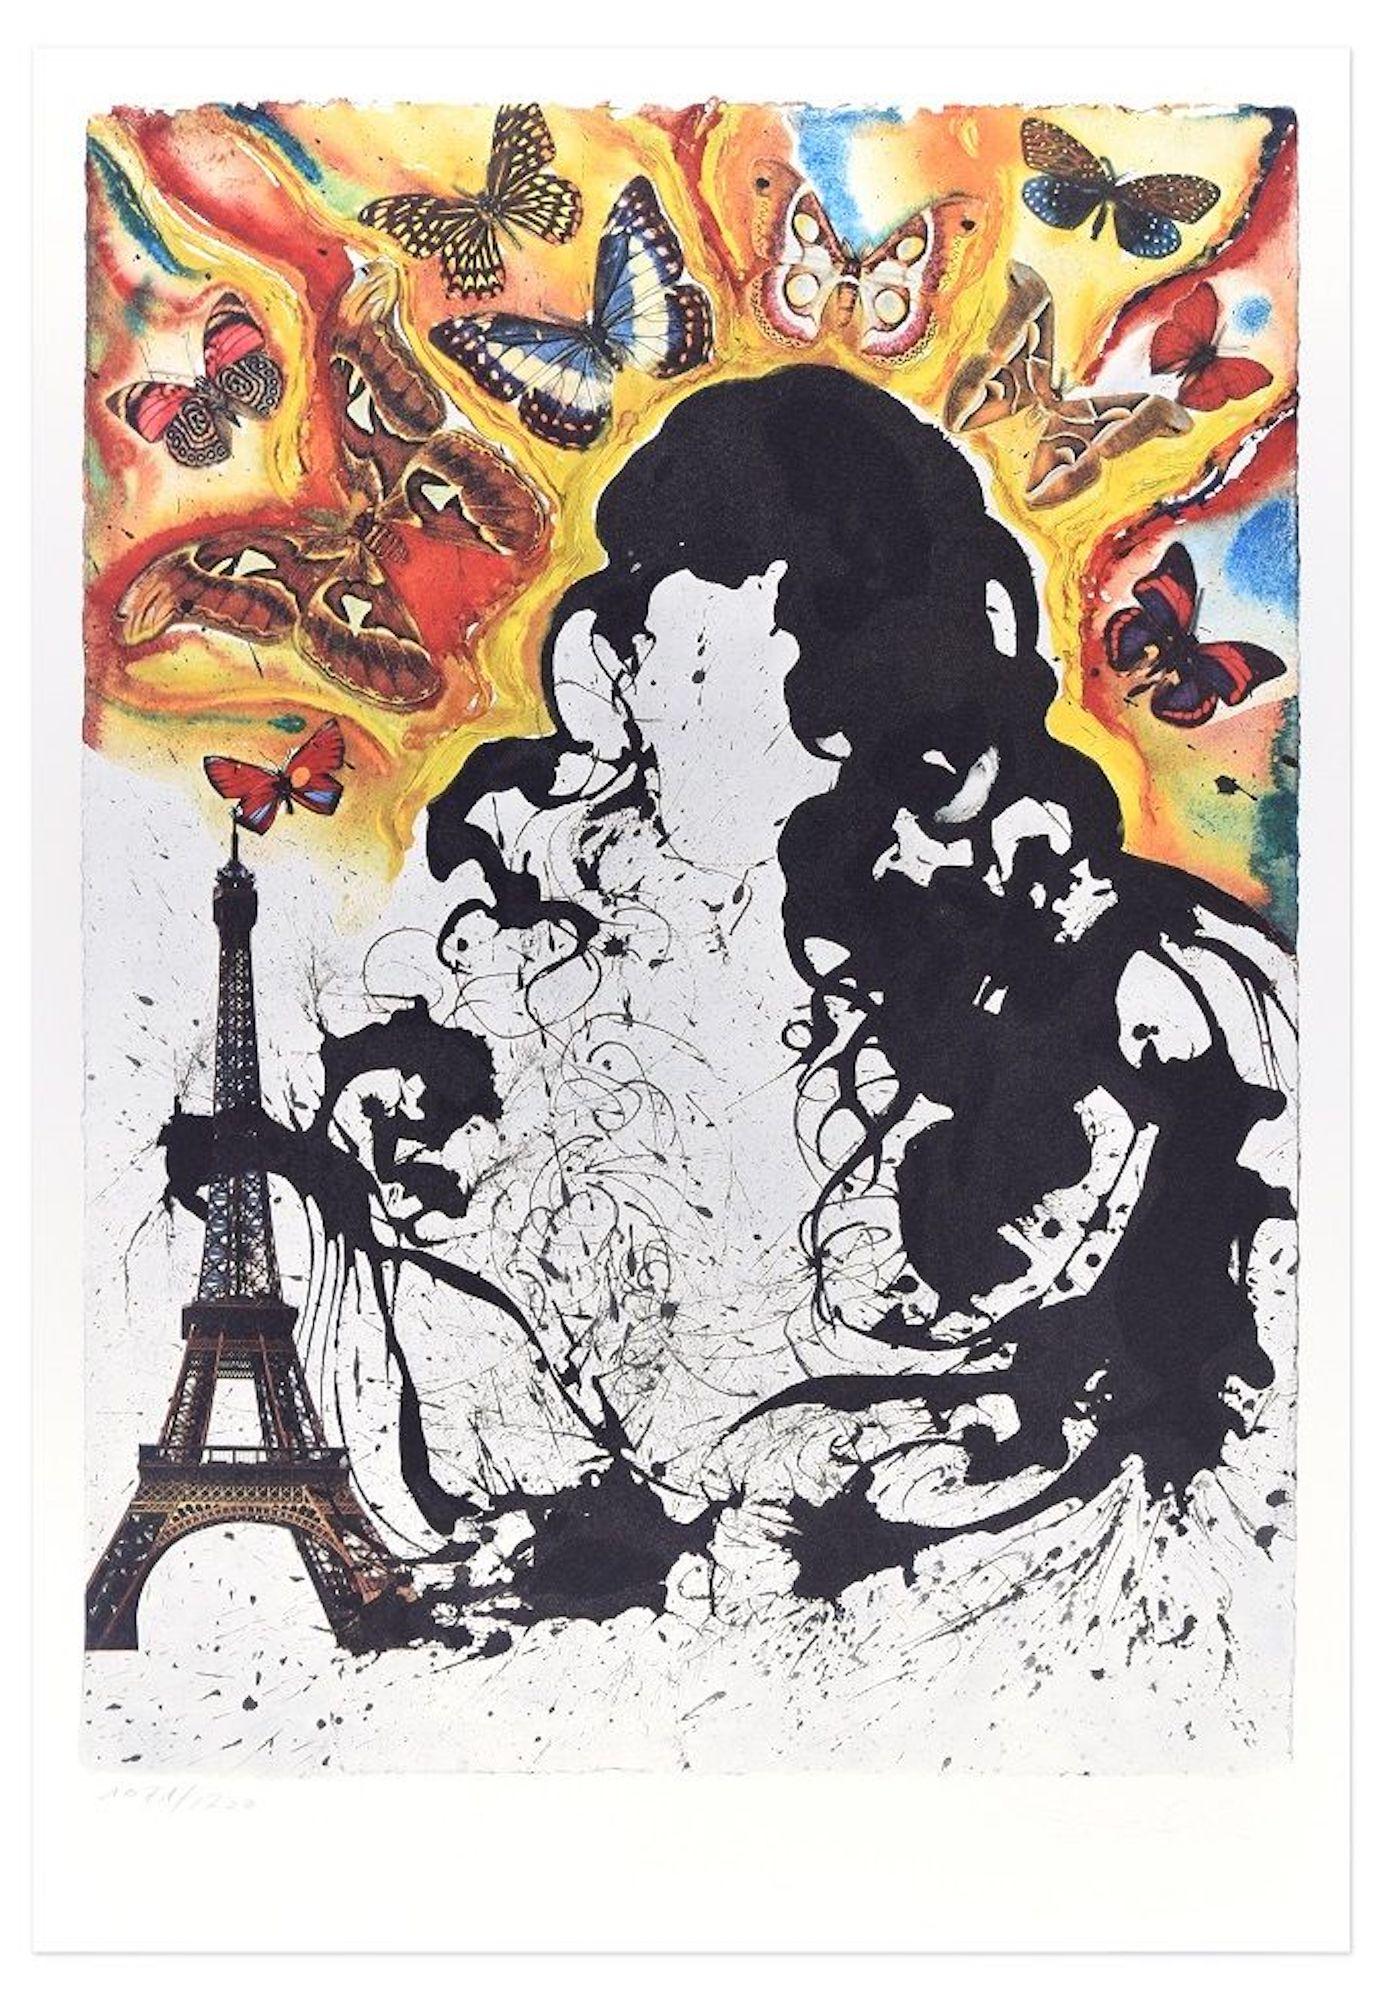 Salvador Dalí Print – Plate I - From "Suite Papillon" - Original Lithograph and Heliogravure - 1969